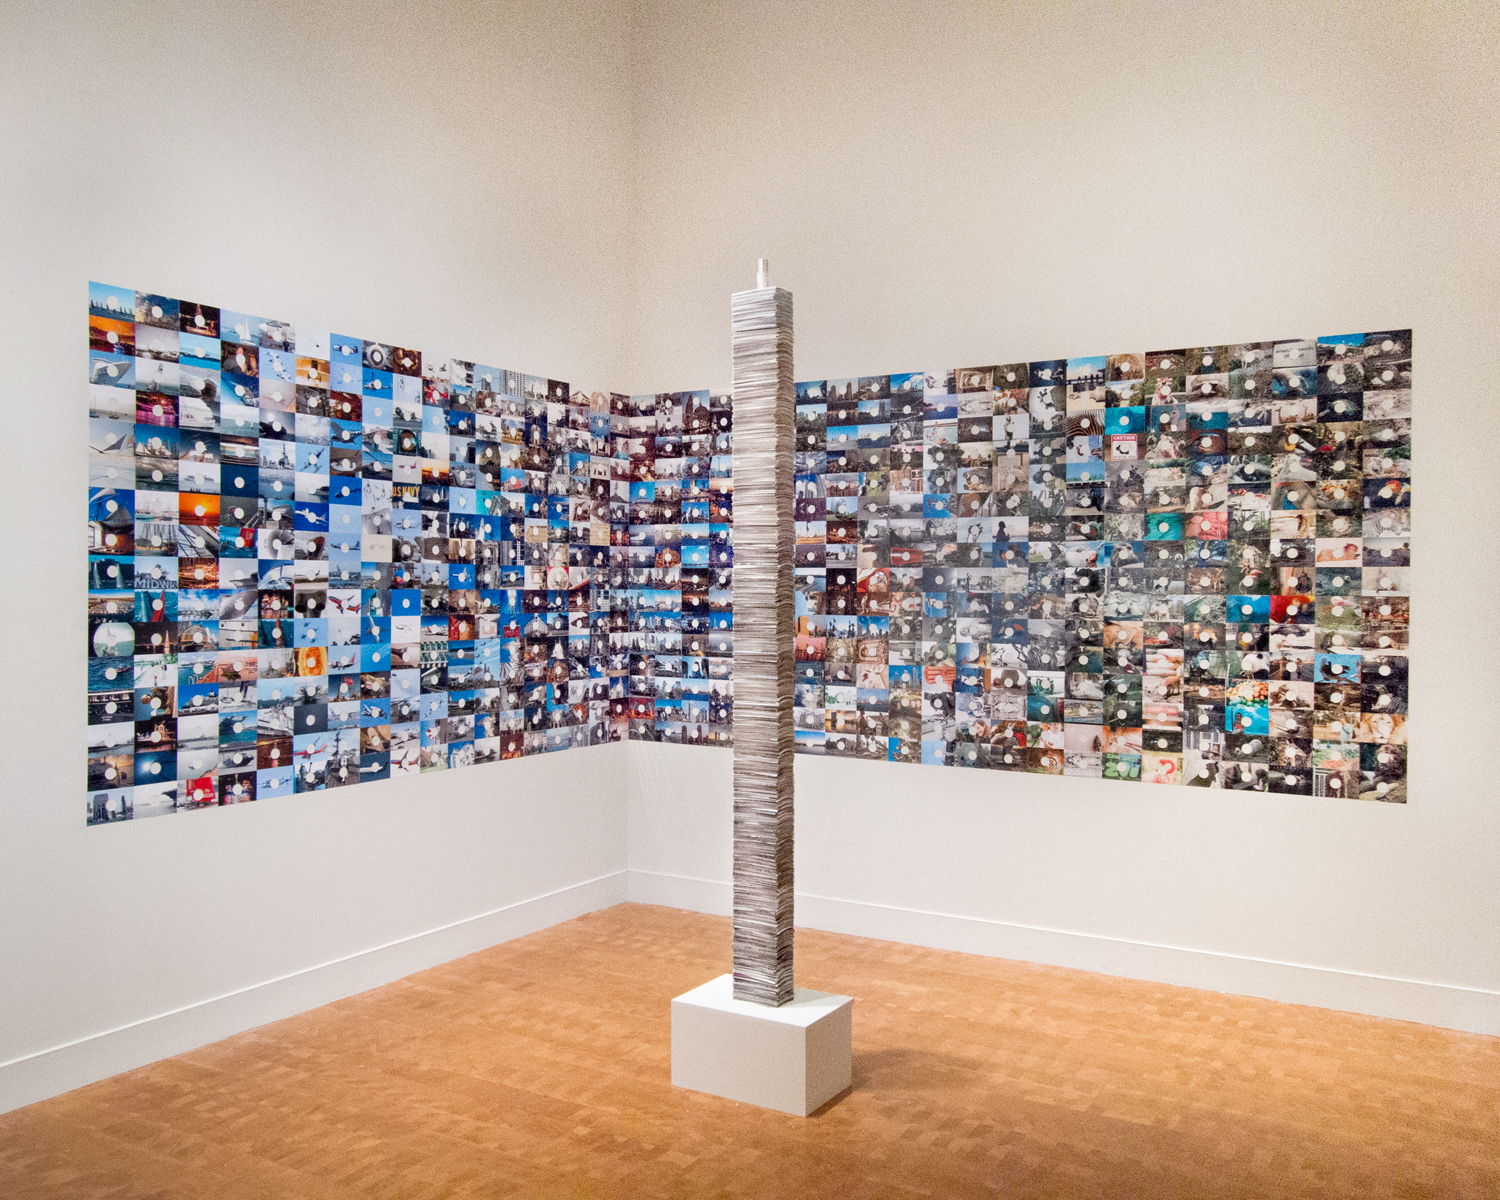 Punctum (San Diego), installation view at Museum of Photographic Arts, 2013